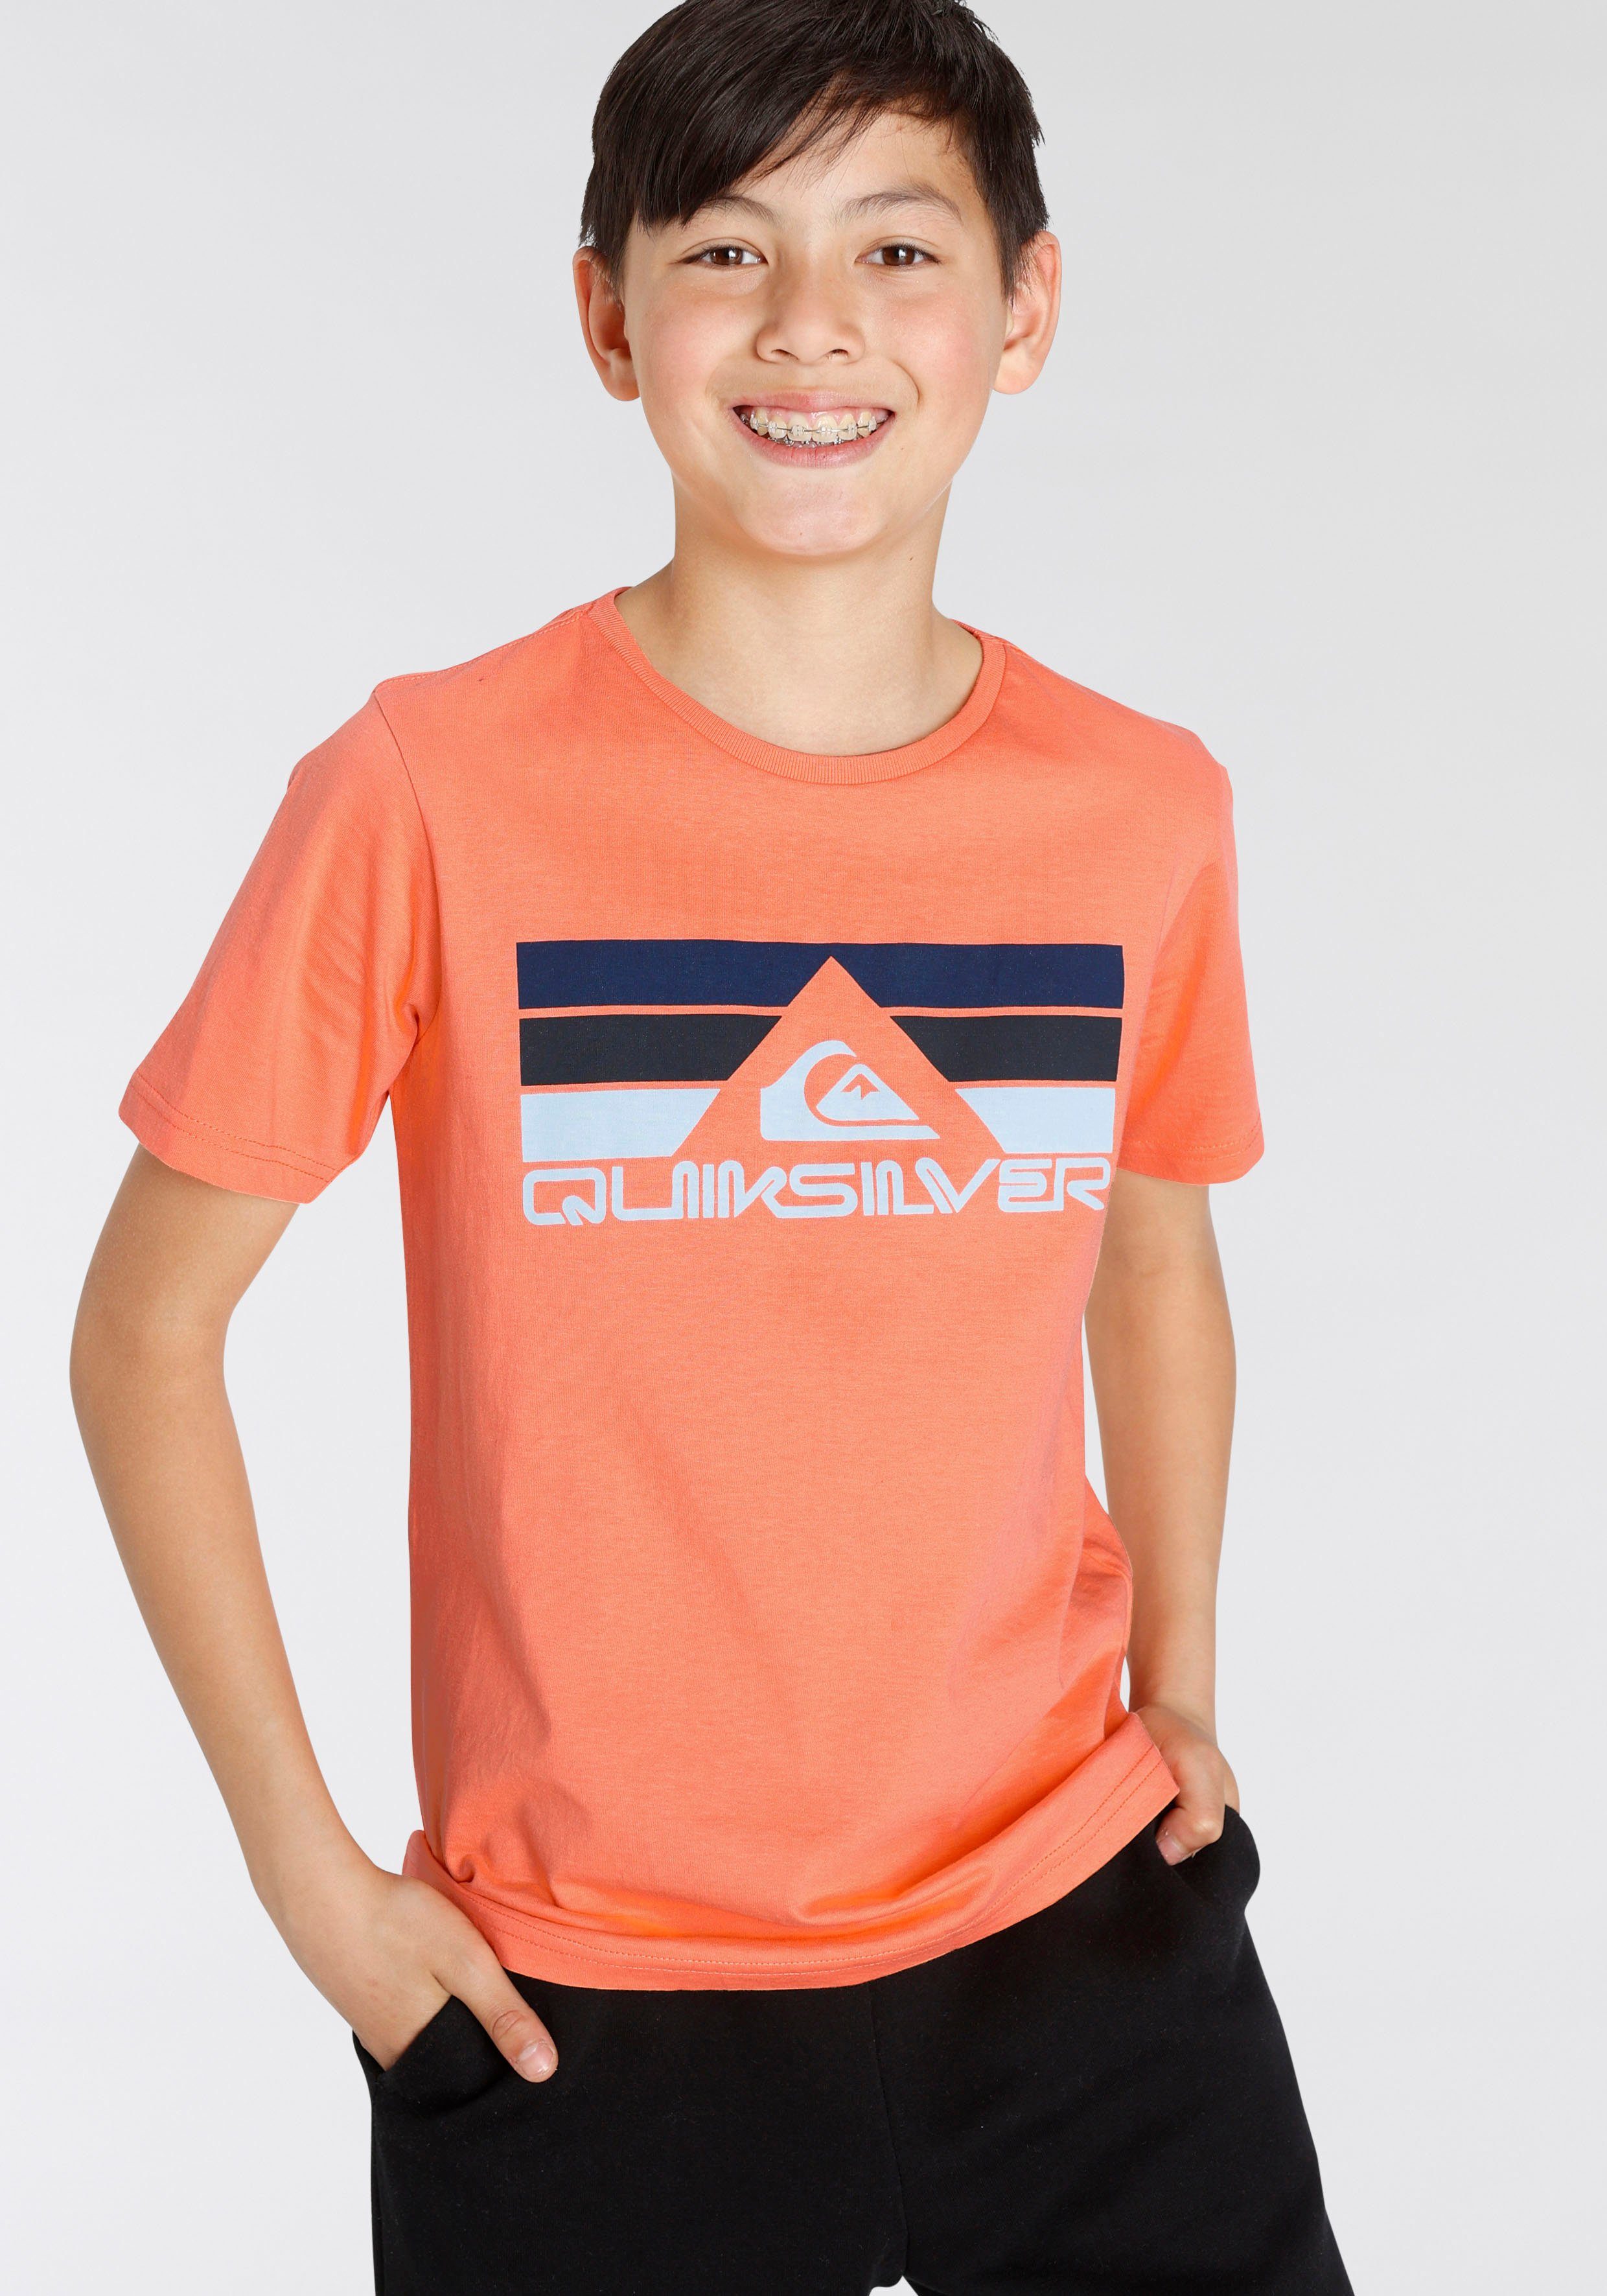 Kinder Quiksilver YOUTH SLEEVE T-Shirt CAB für SHORT TEE - ROCKY PACK